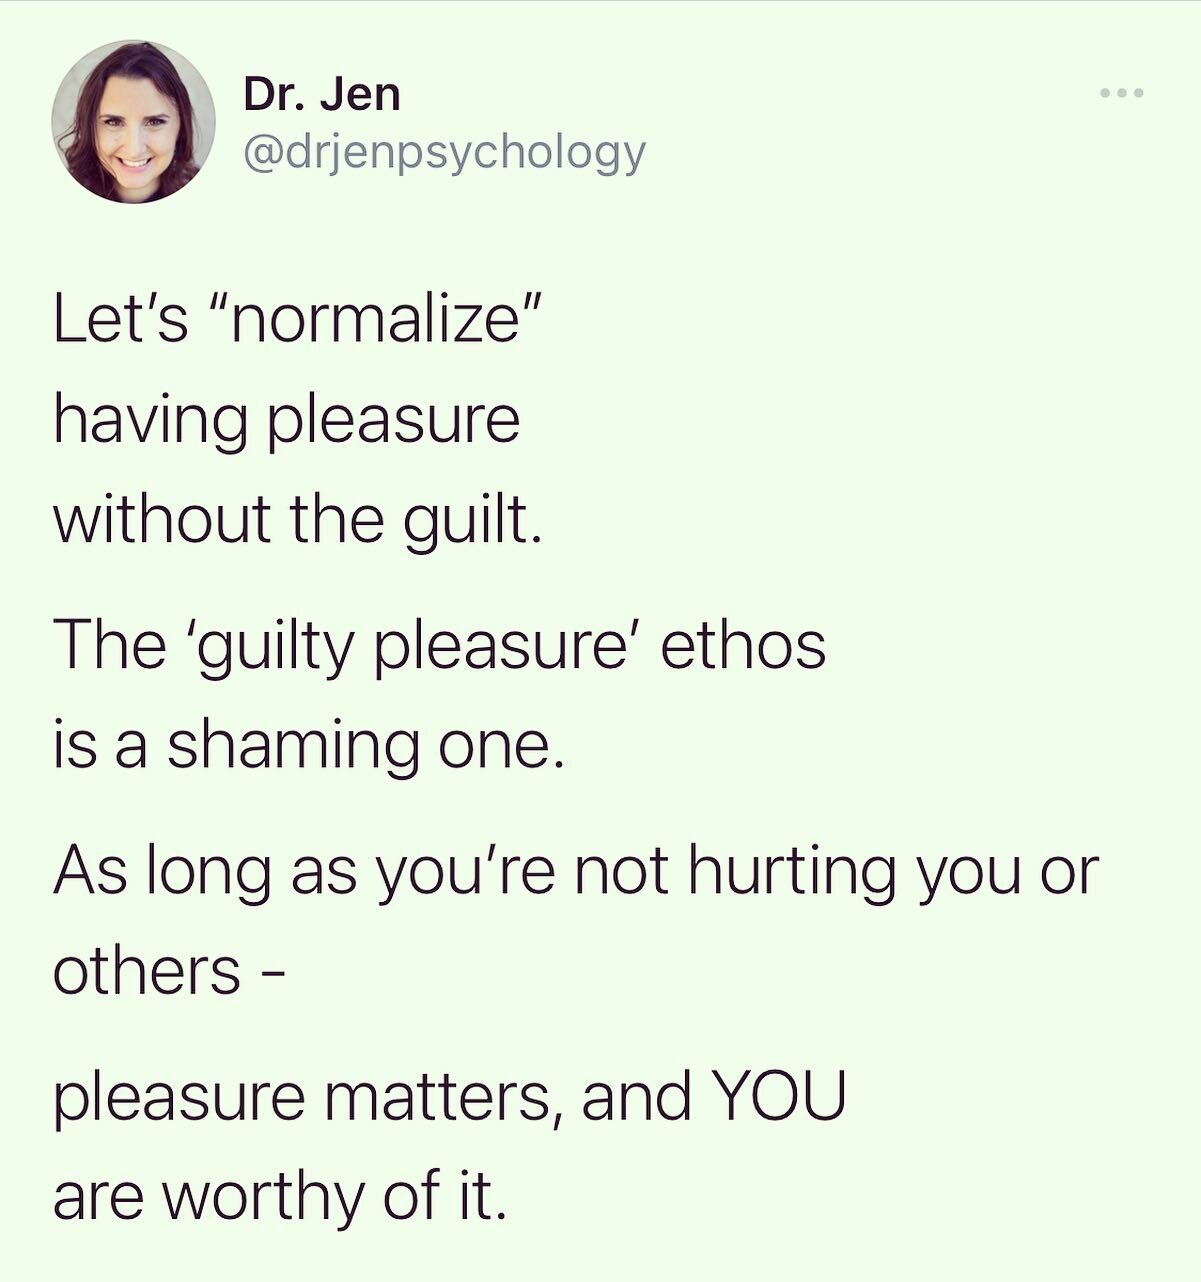 Pleasure is not a bad word. 

Nothing is adaptive if you hurt yourself and others (physically, emotionally, spiritually, ETC) - so watch out to not engage in that. That&rsquo;s different than pleasure. AND allow yourself actual pleasure. 

GUILT FREE